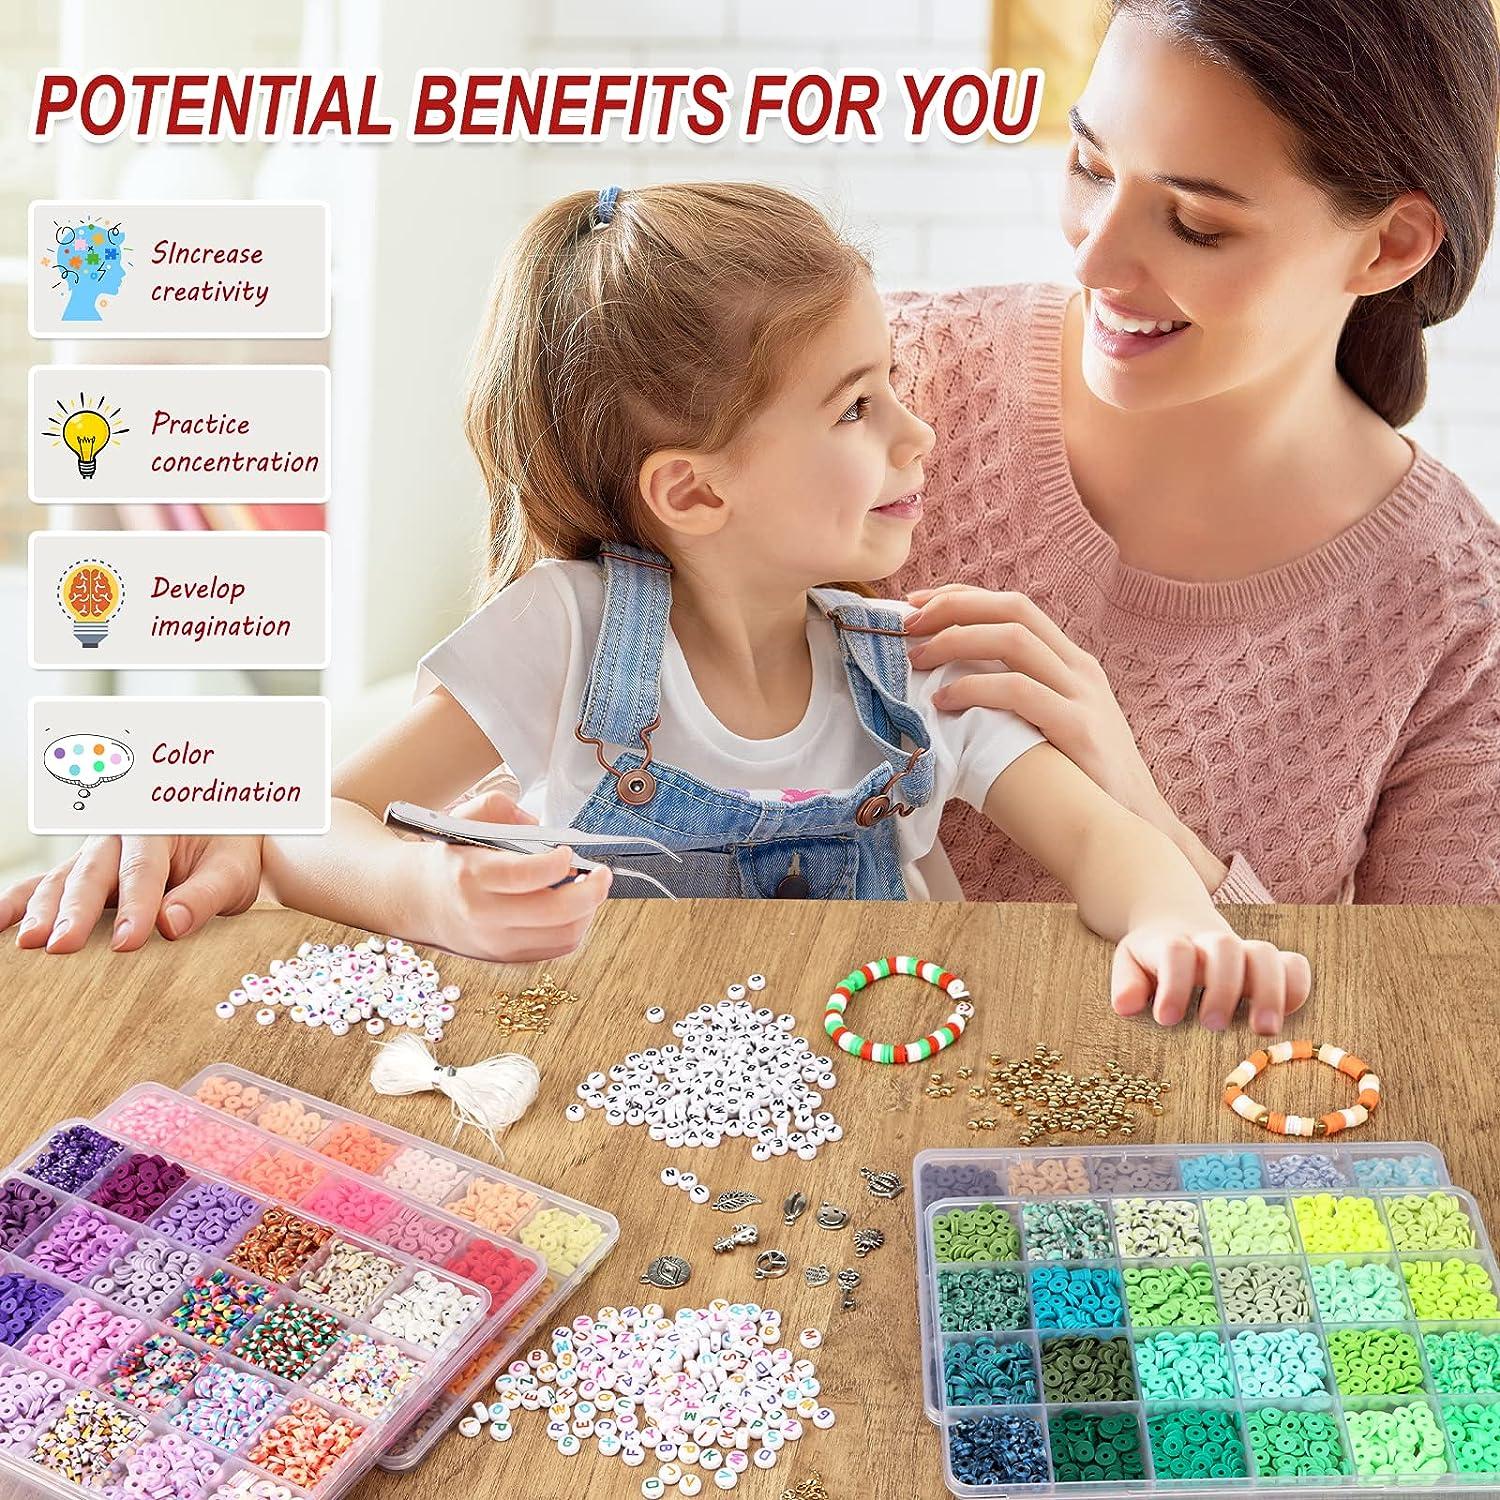 QUEFE 10800Pcs Clay Beads Kit for Bracelet Making 72 Colors Flat round  Polymer C